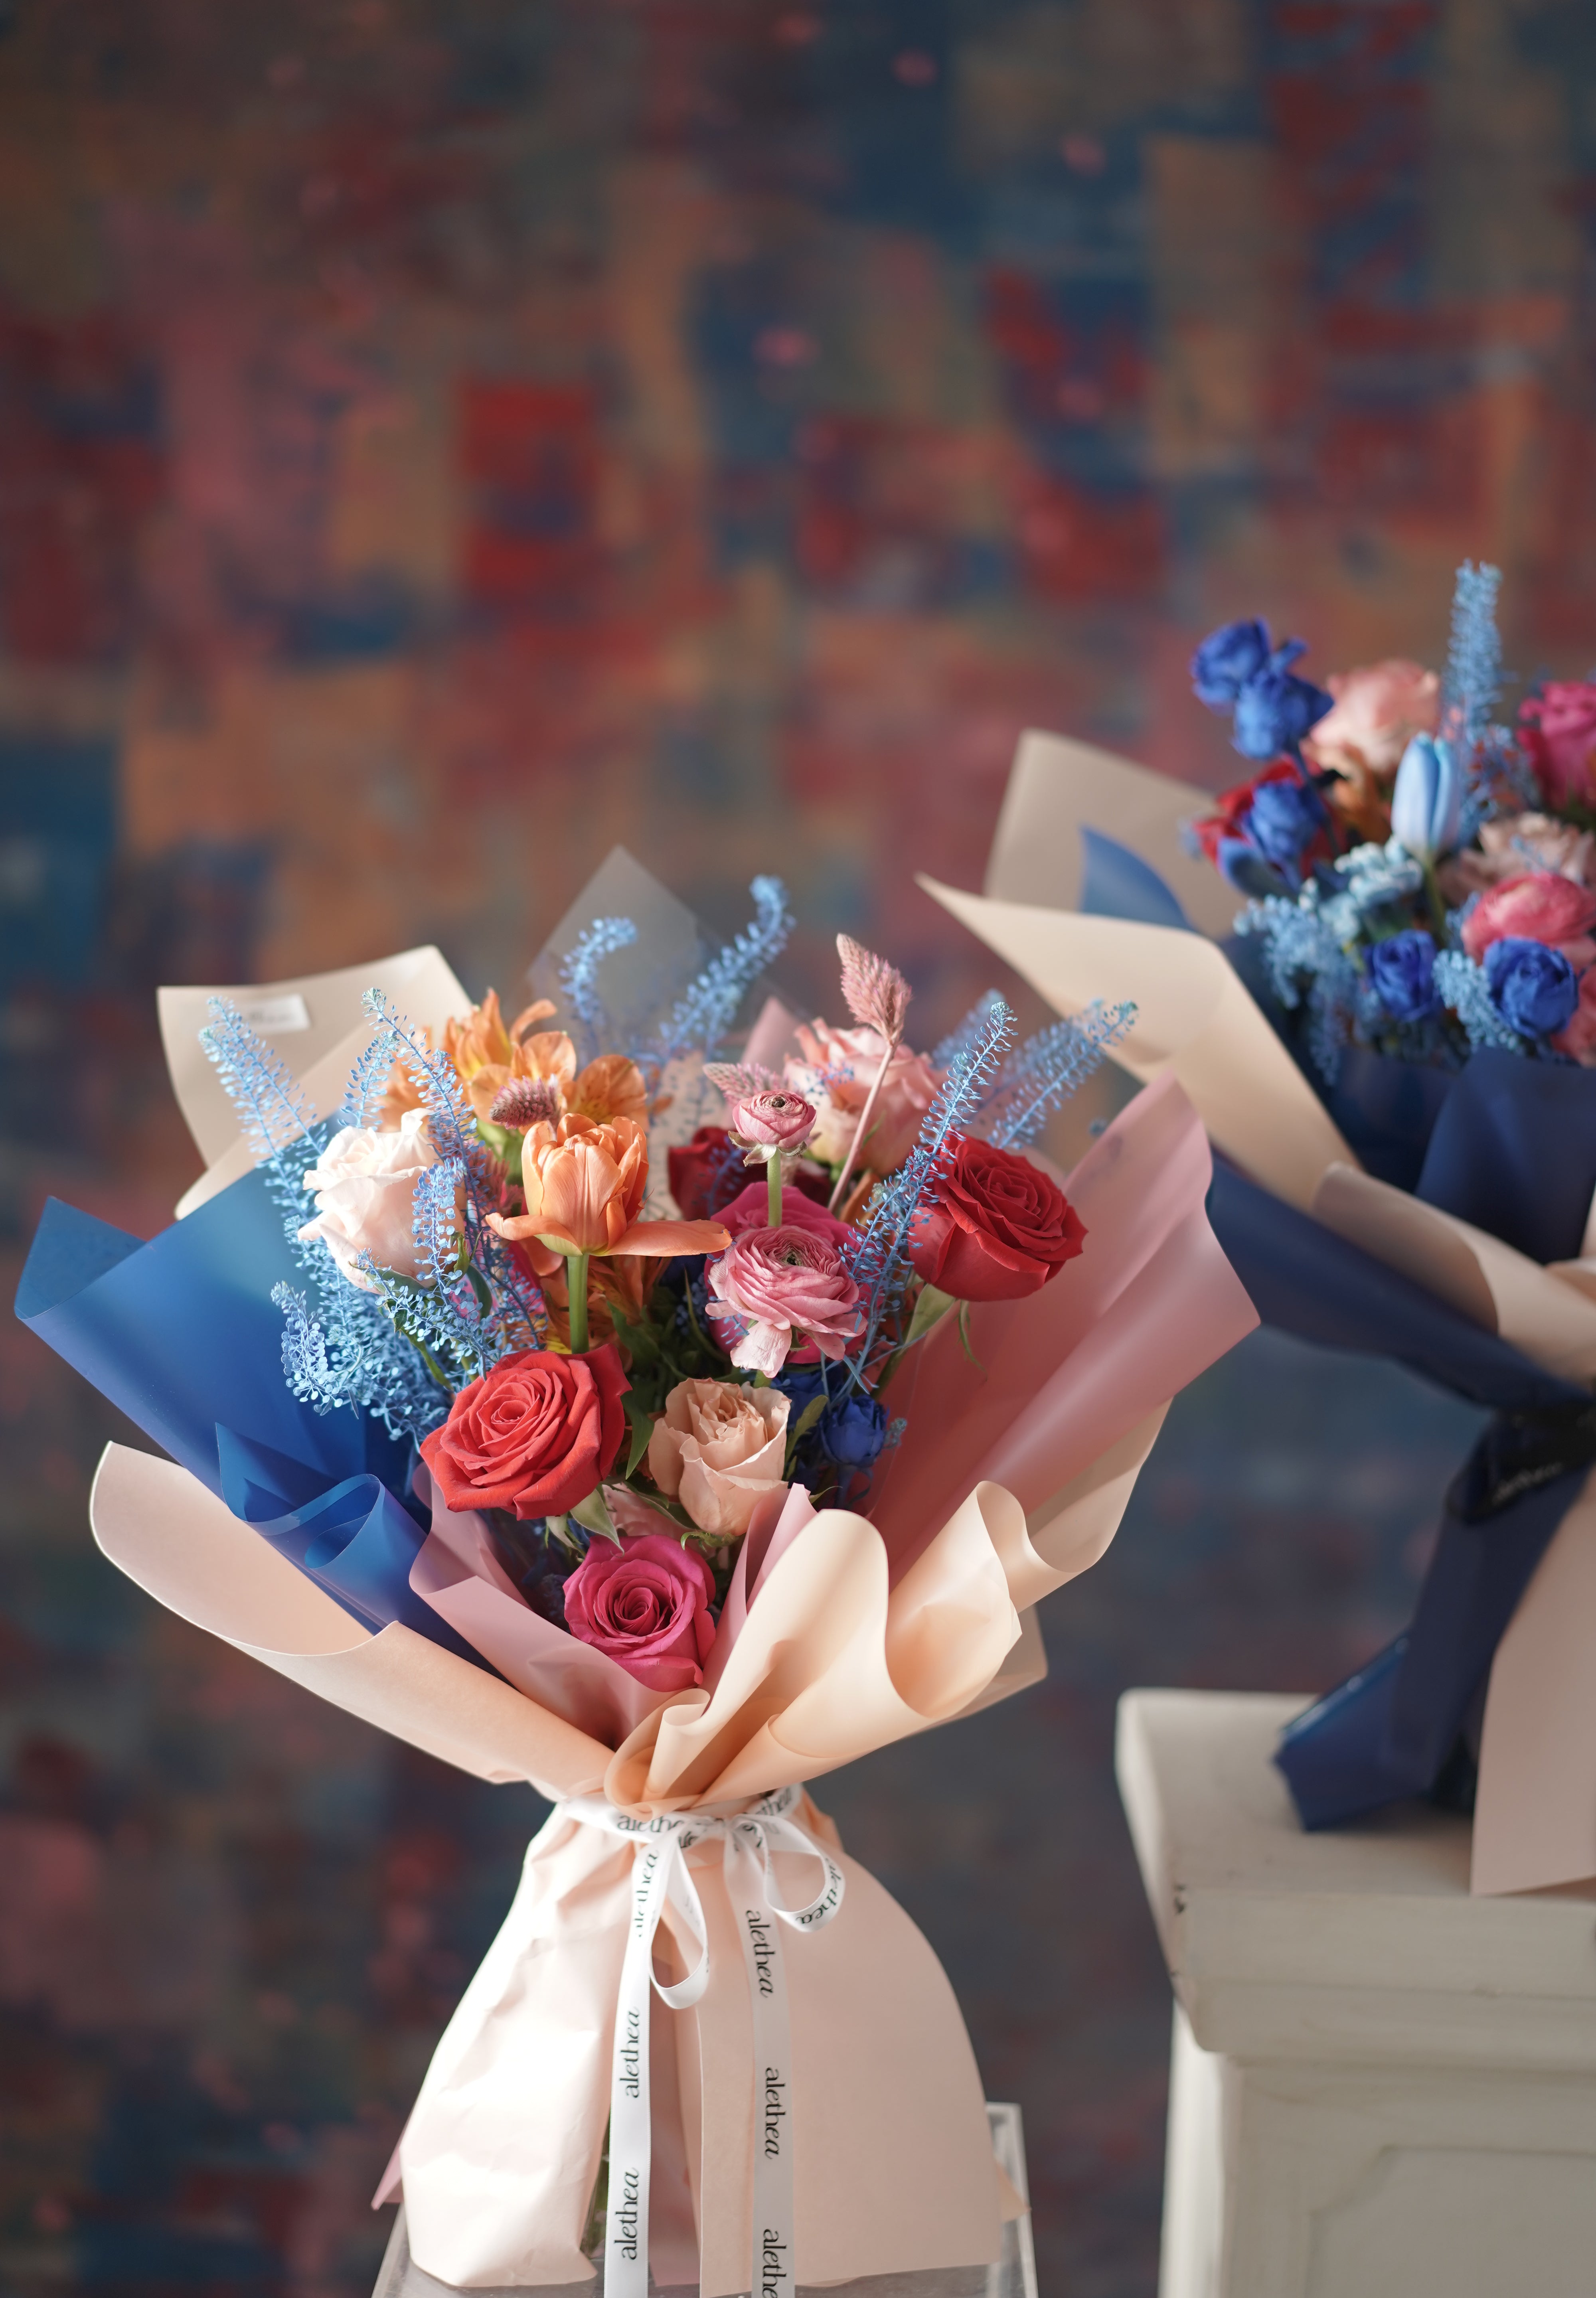 Aries Birthday Flowers Bouquet - Zodiac Collection